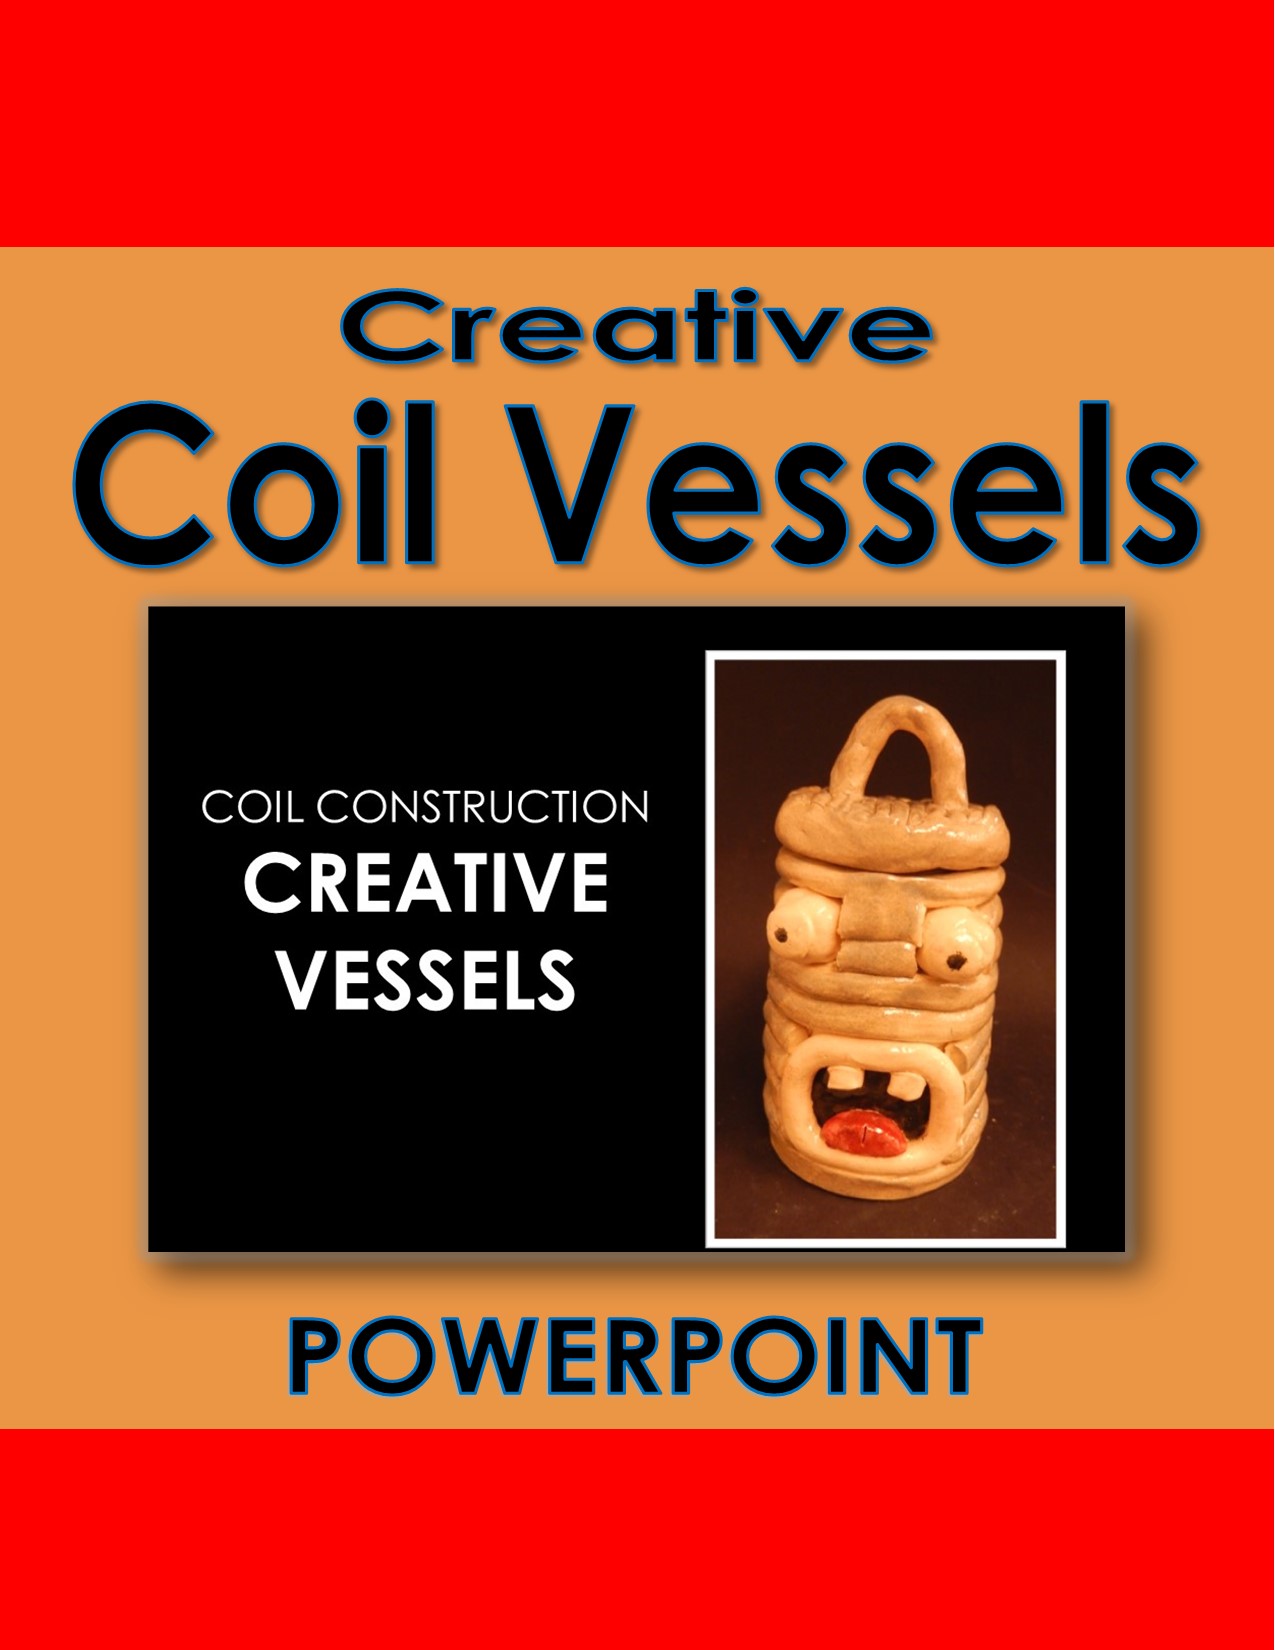 TYPES OF COILS POSTER (Orange) - Payhip  Pottery lessons, Clay ceramics, Clay  pottery